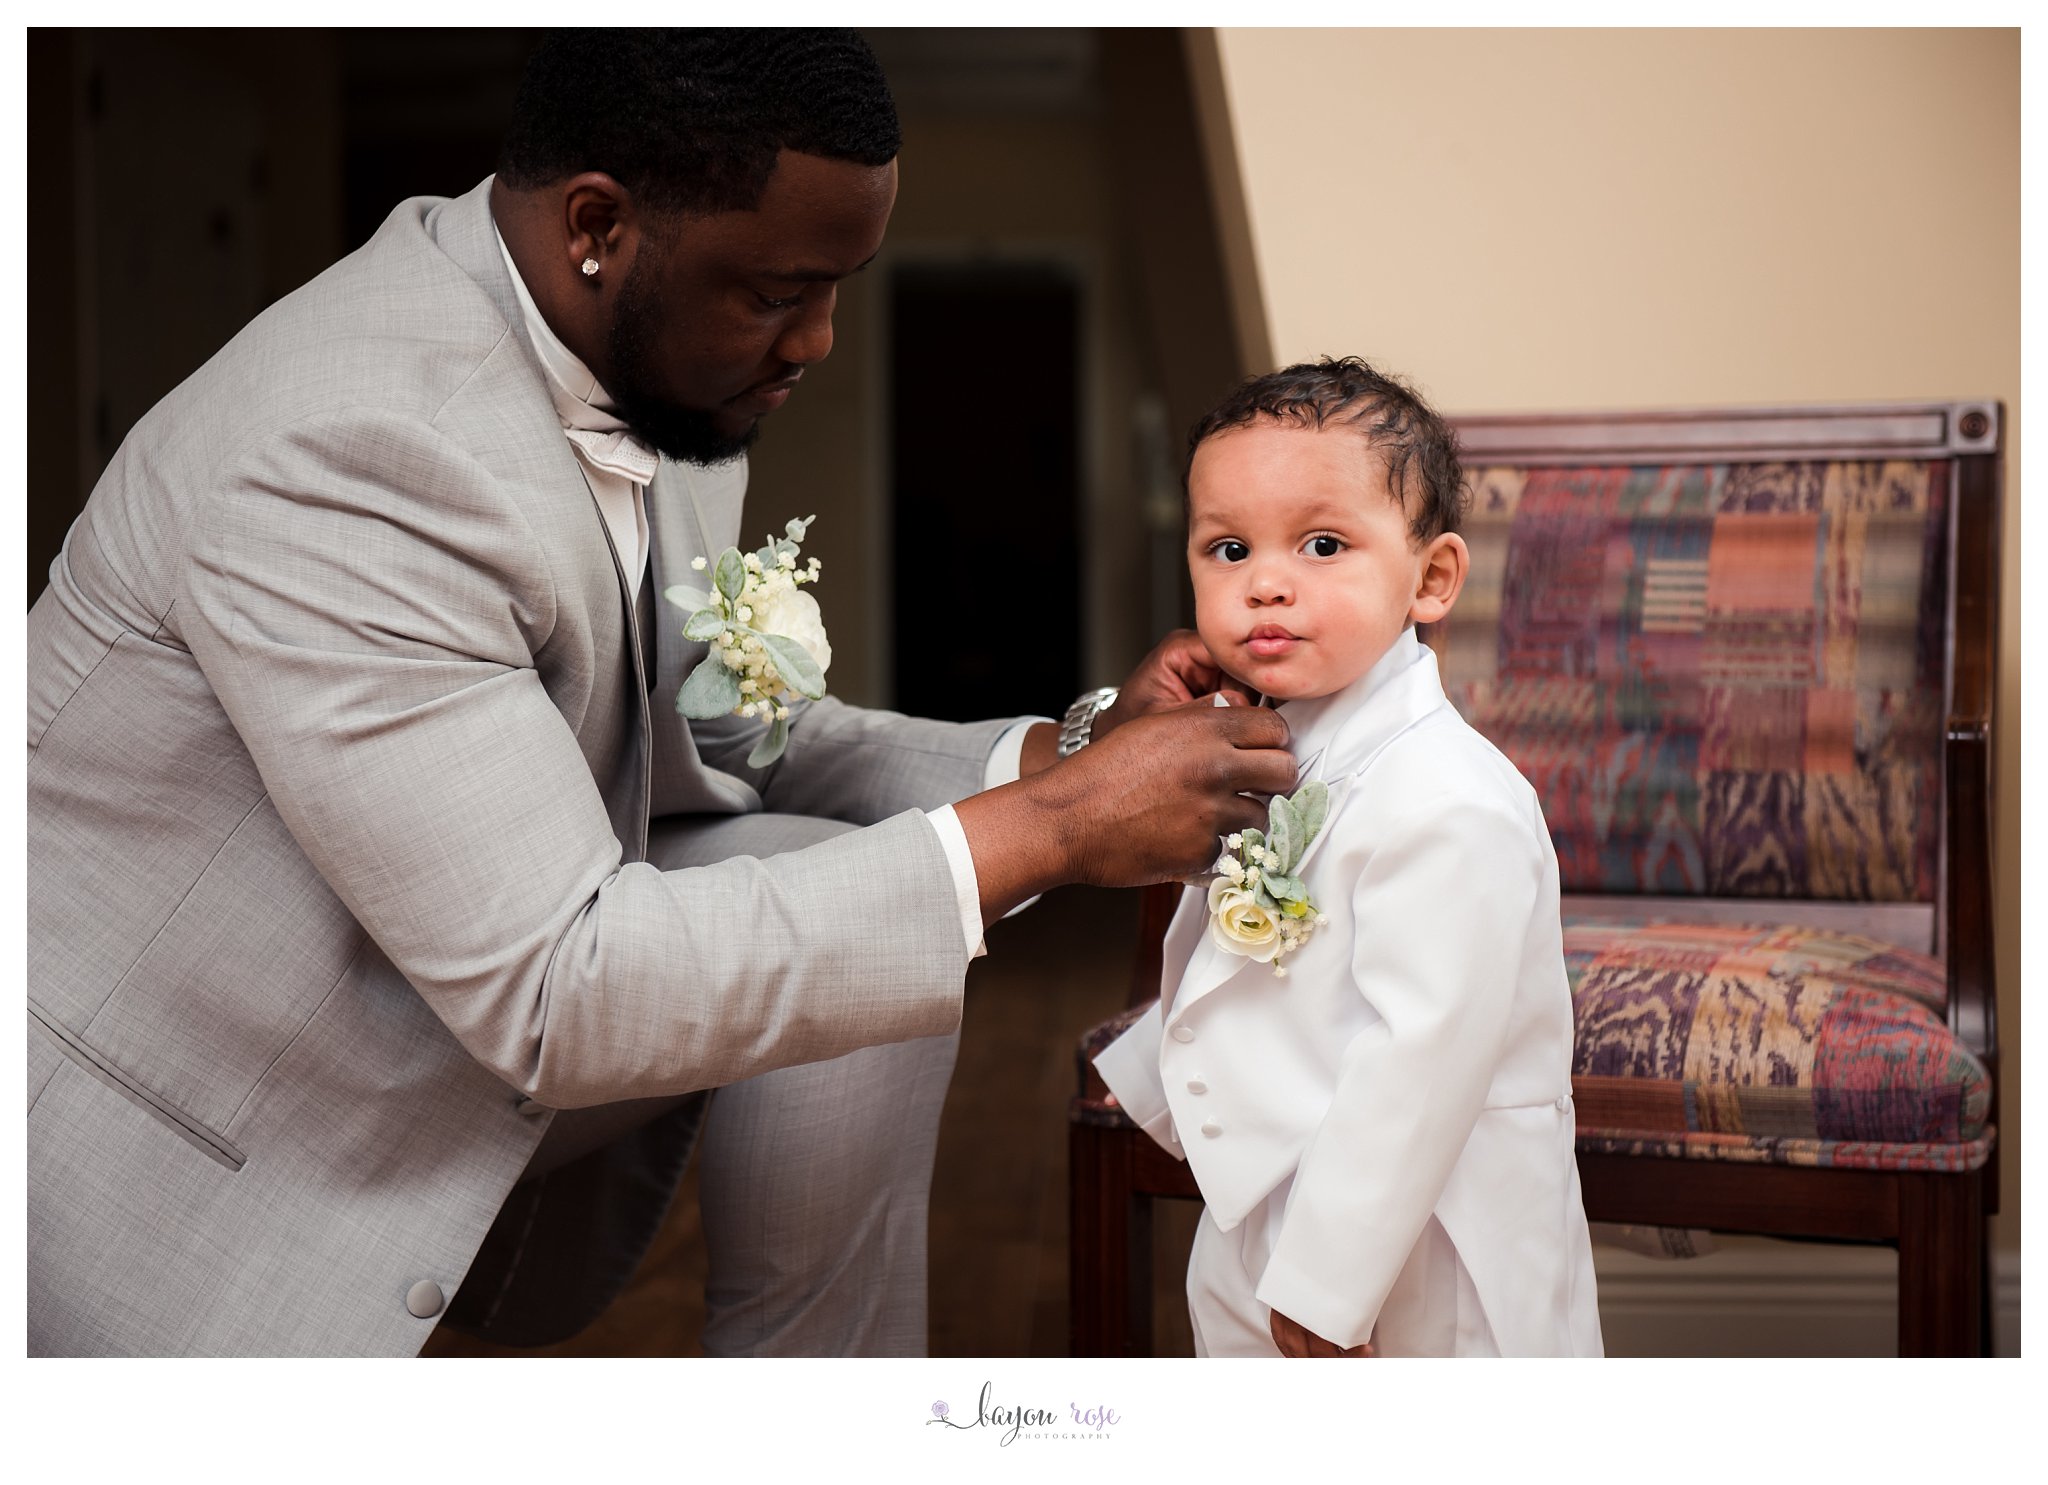 bride and groom's son getting dressed on wedding day